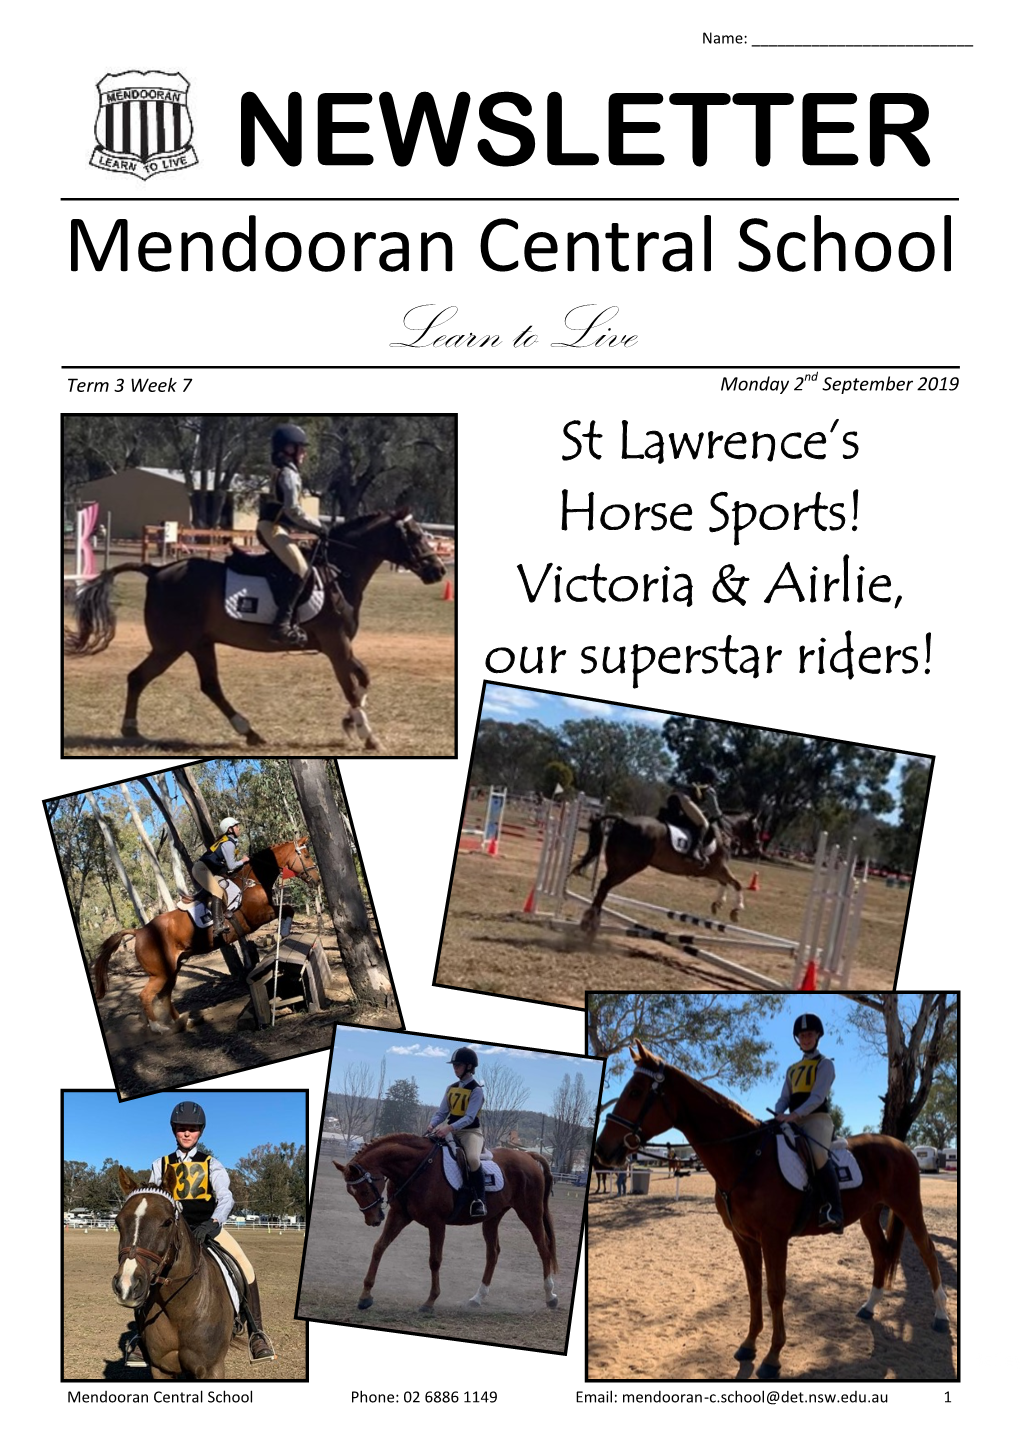 Mendooran Central School Learn to Live Term 3 Week 7 Monday 2Nd September 2019 St Lawrence’S Horse Sports! Victoria & Airlie, Our Superstar Riders!